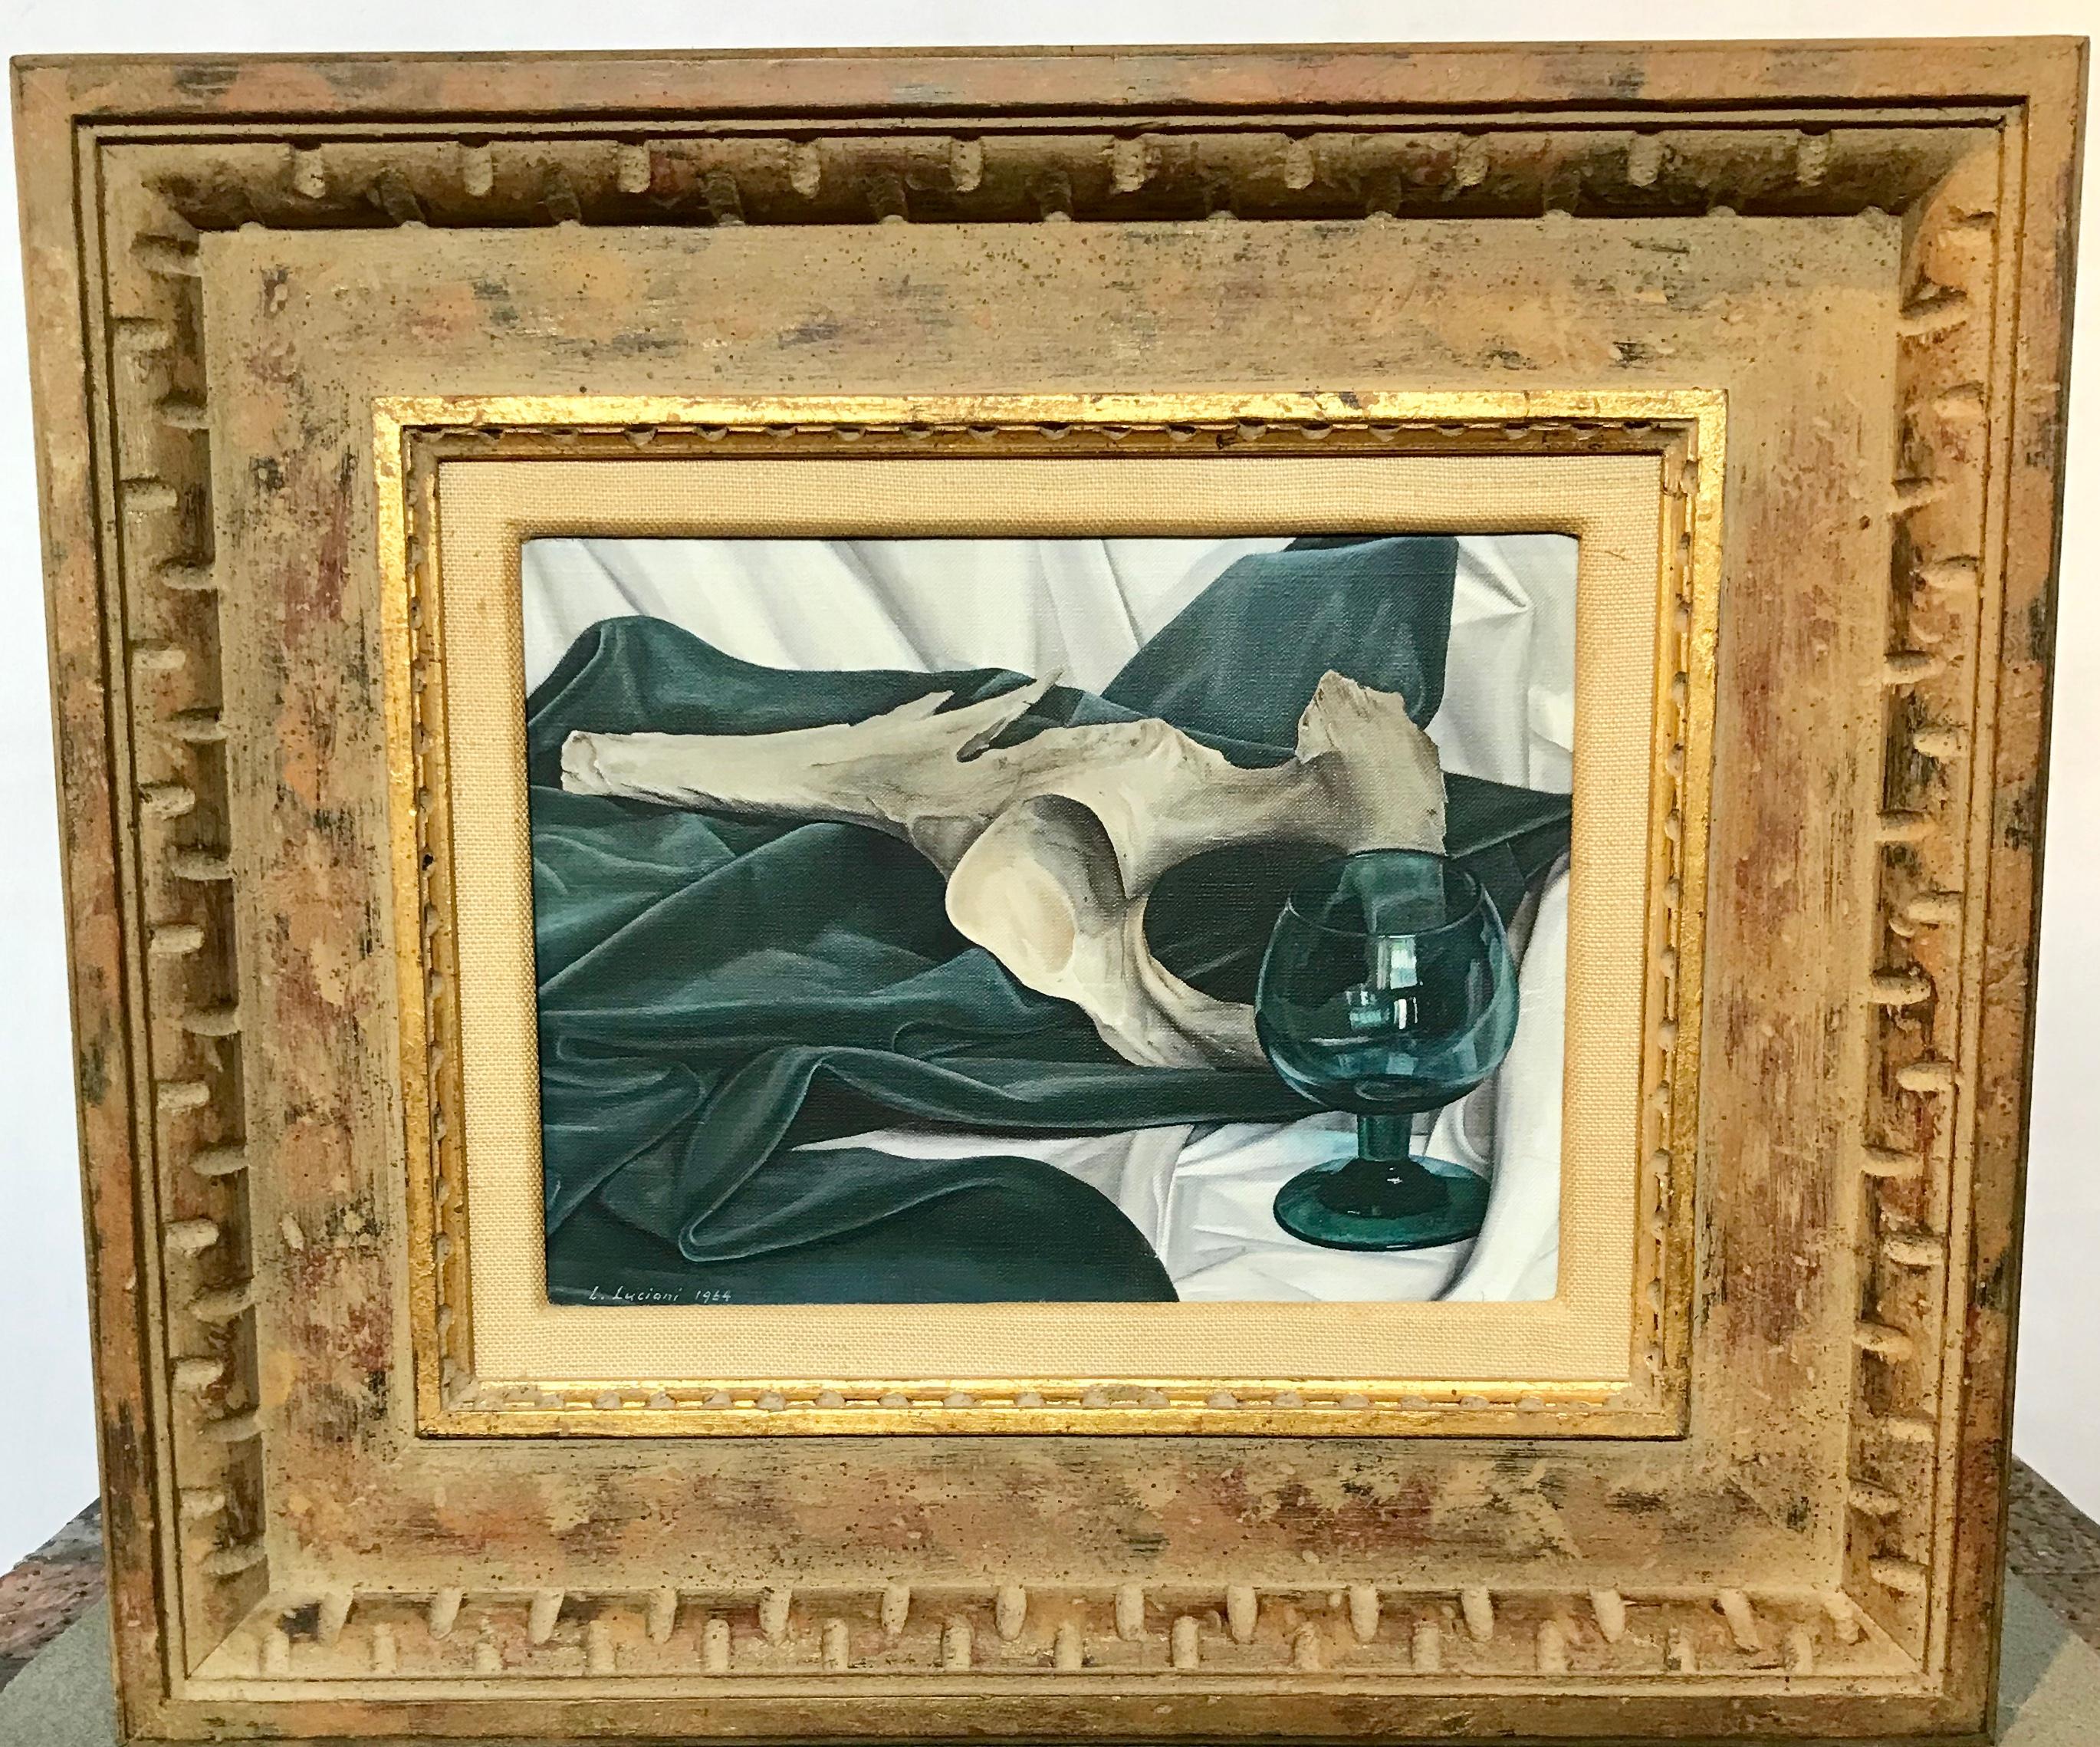 Luigi Lucioni ( American 1900-1988) Oil On Canvas Still Life signed on the Front and on Reverse. From a West End Avenue apartment on Consignment. in its original frame, matted. 
Luigi Lucioni was an Italian-born American painter and printmaker best